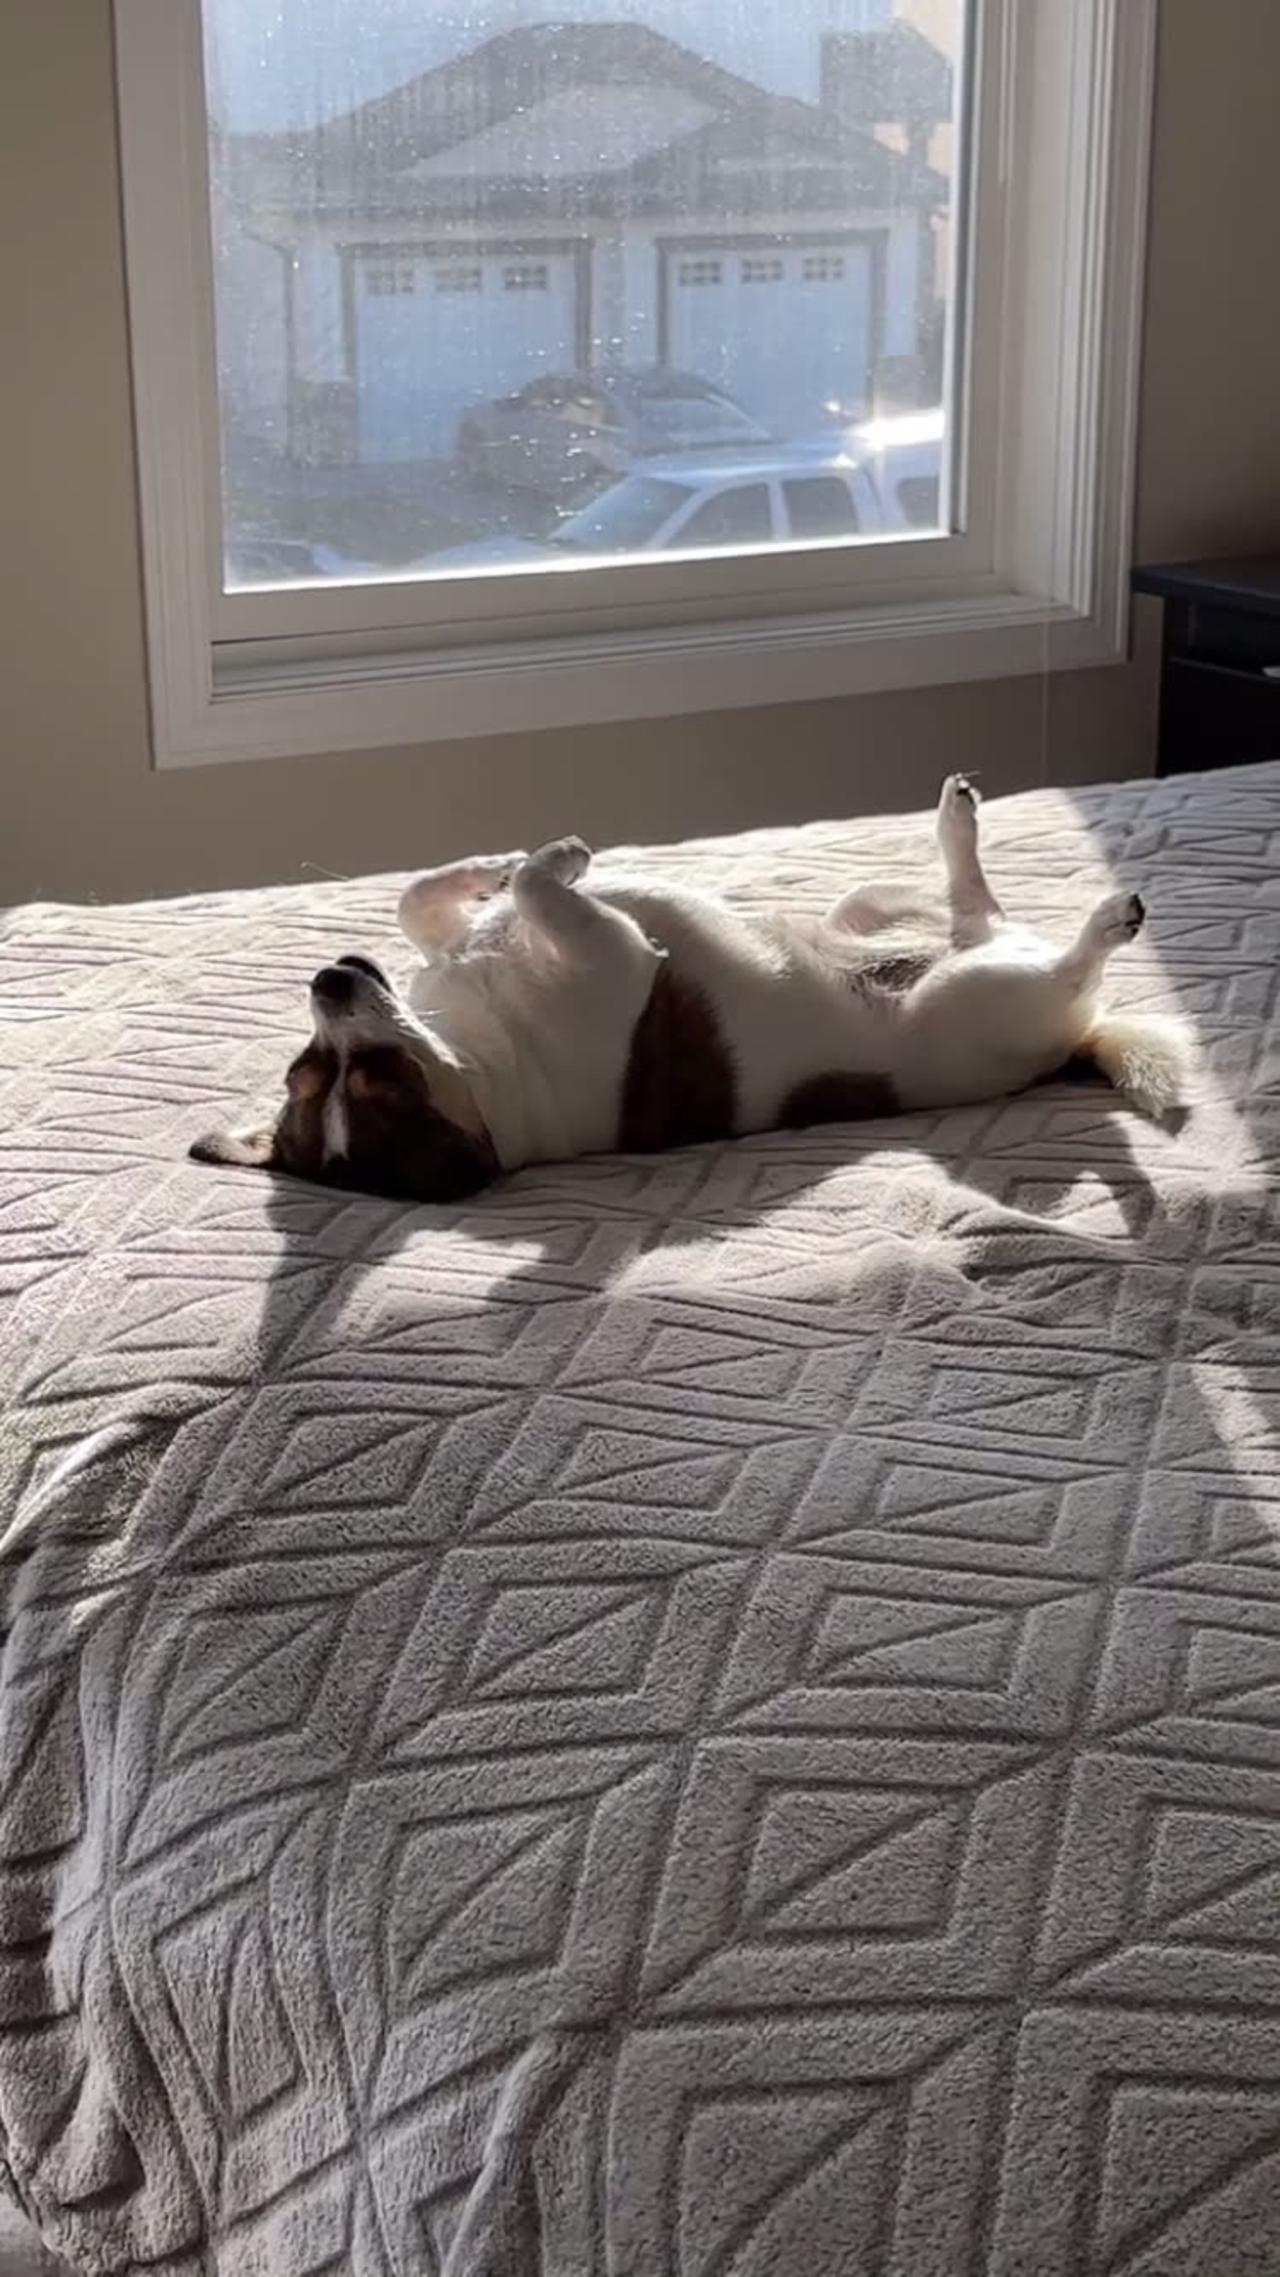 Dog utterly relaxed as it sunbathes on owner's bed